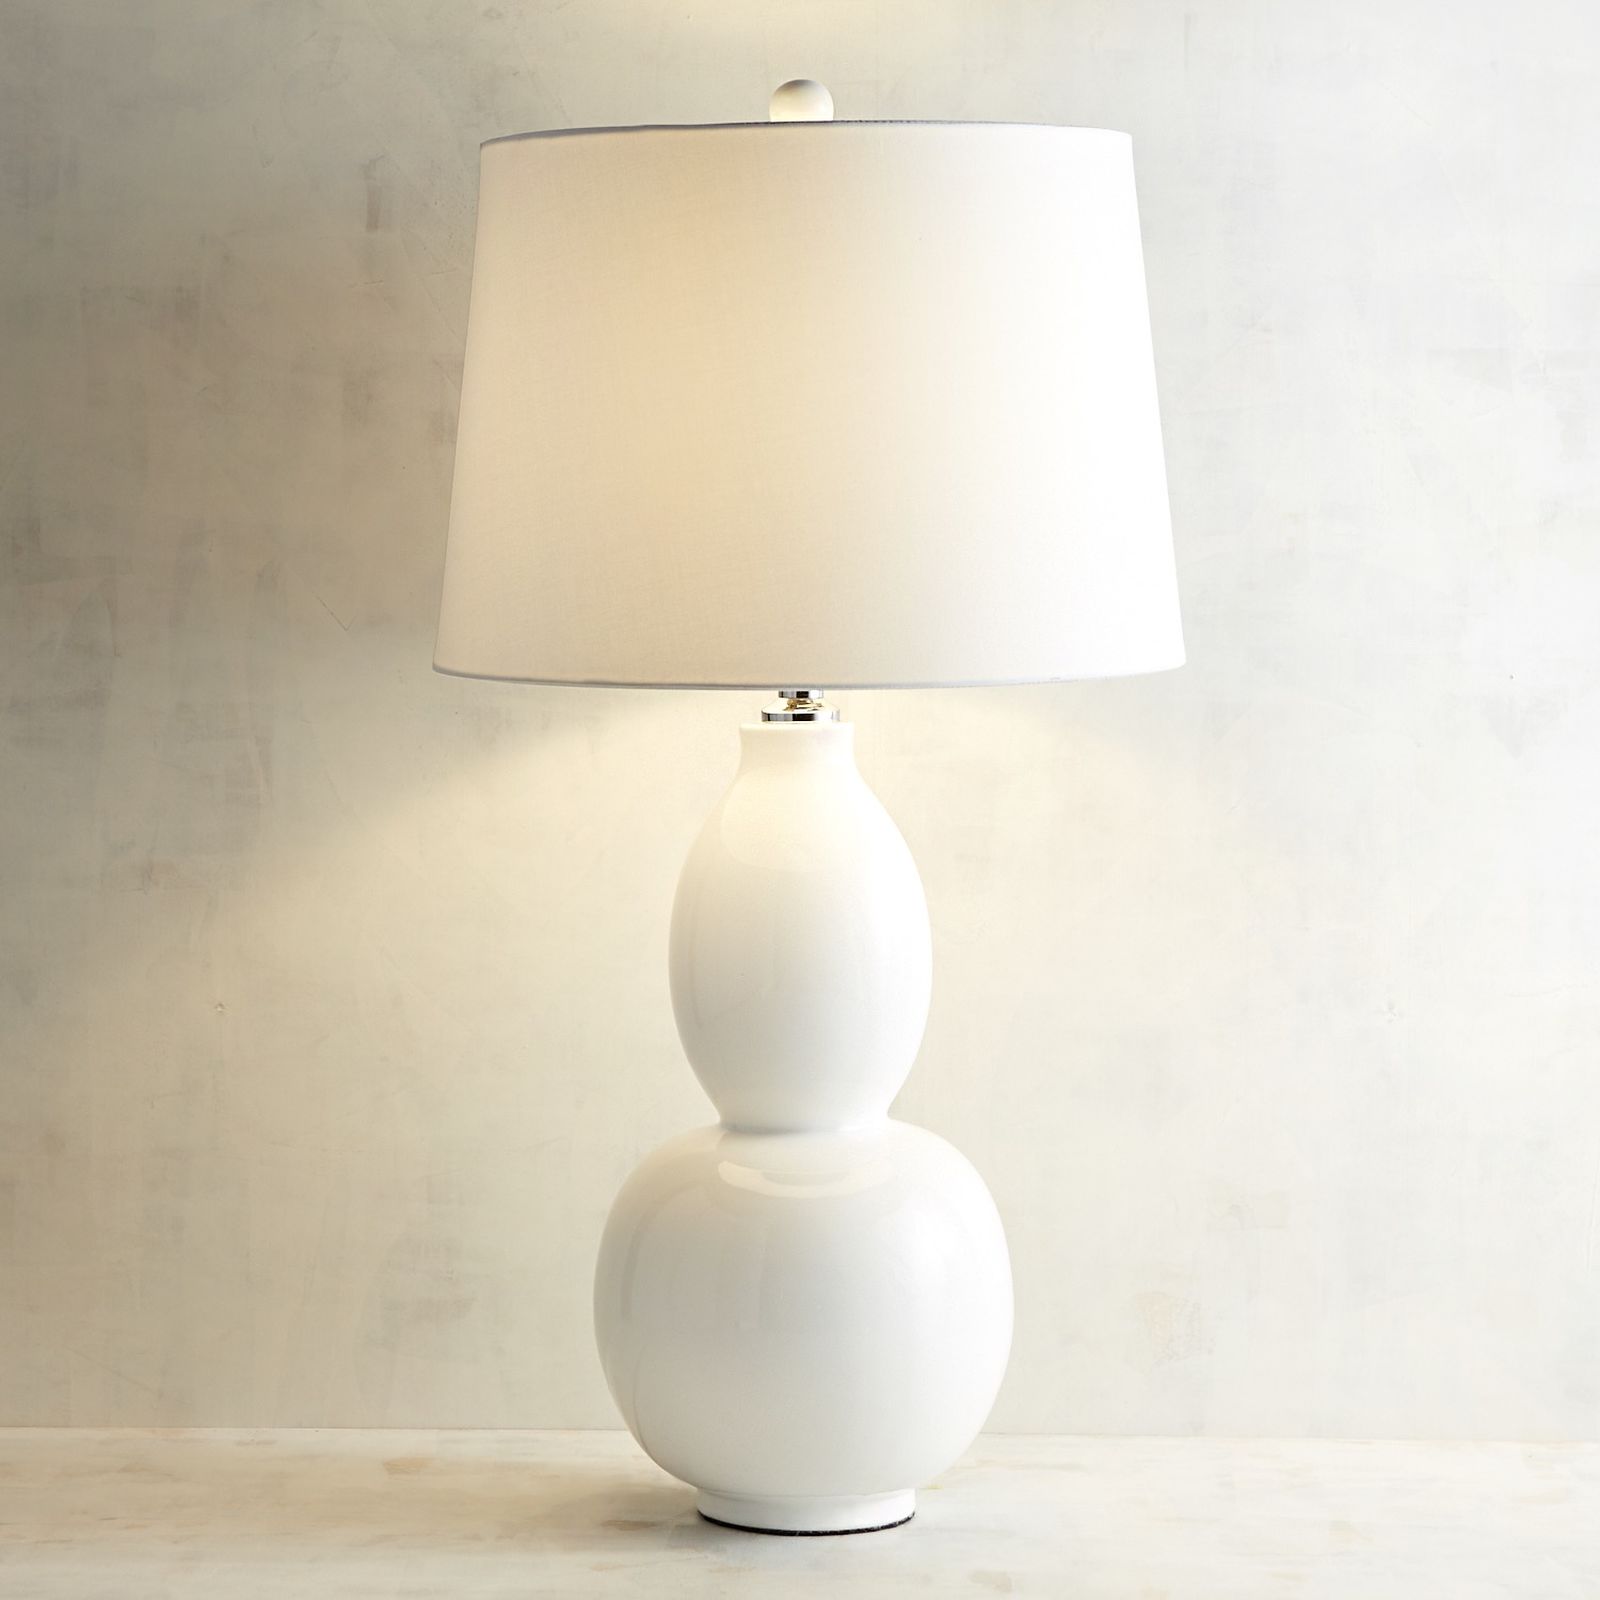 White Table Lamp Ideas — Table Design : How to Make White Table Lamp